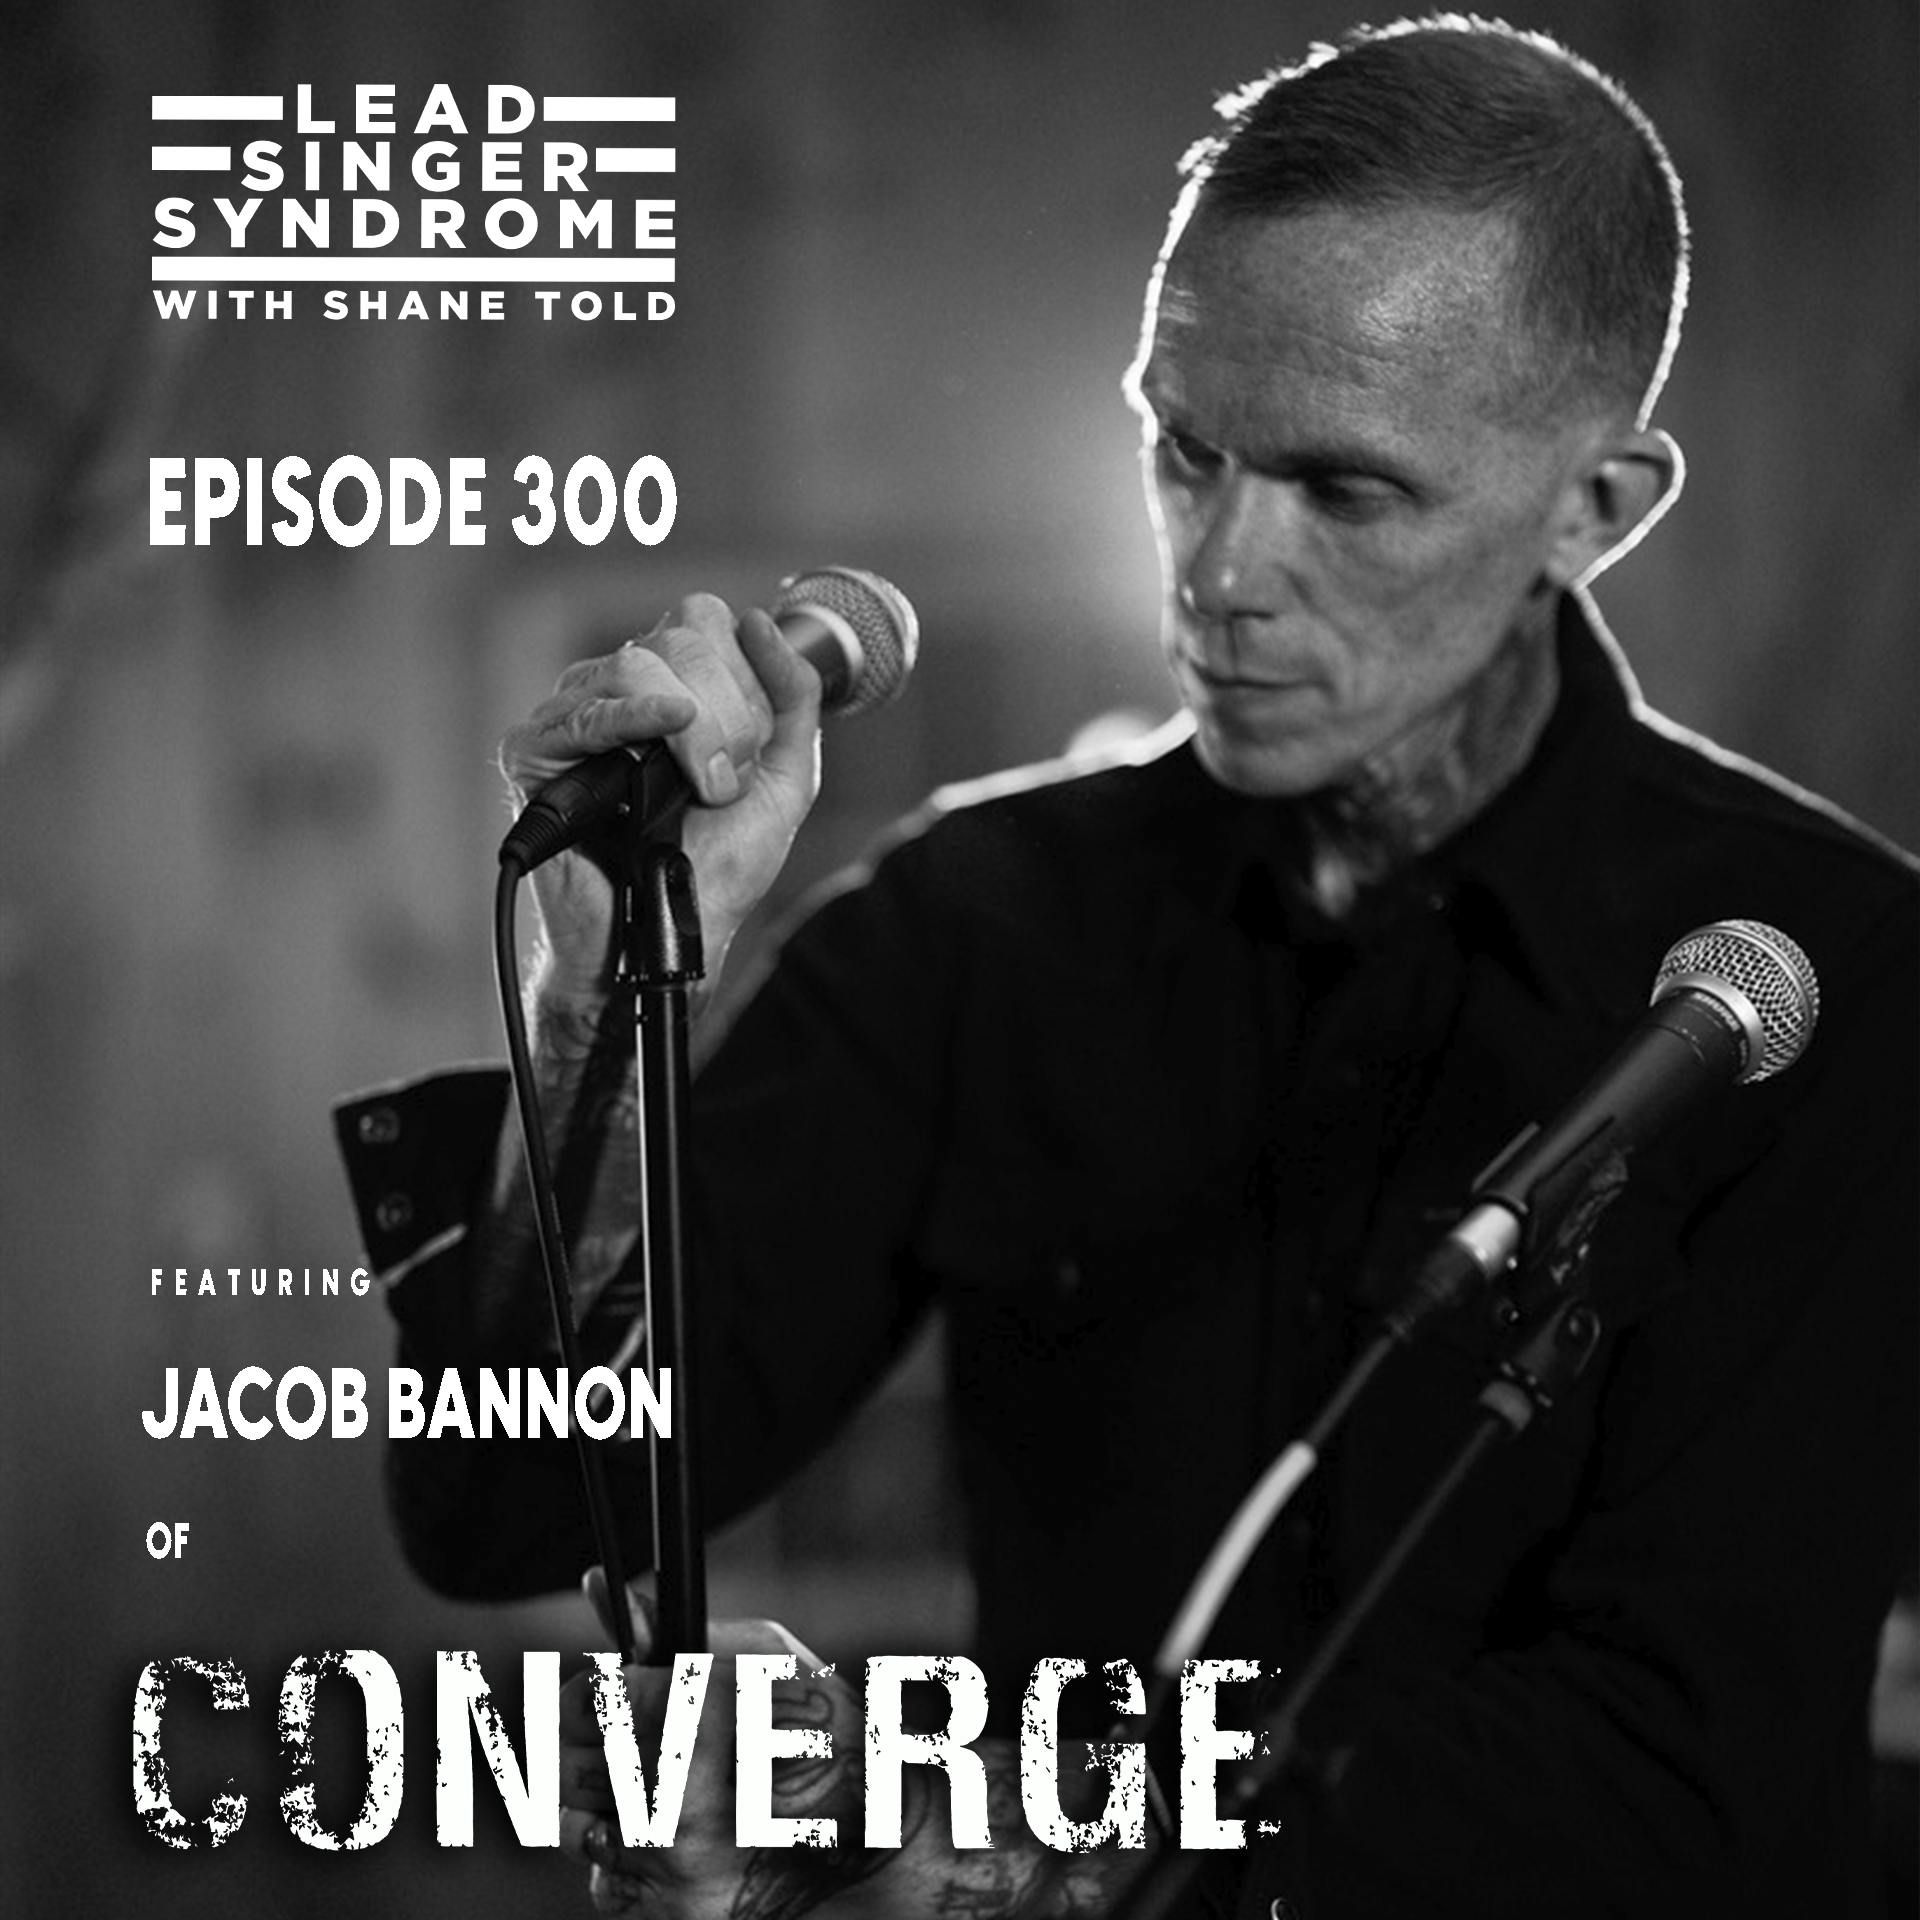 EPISODE 300 - Featuring Jacob Bannon of Converge